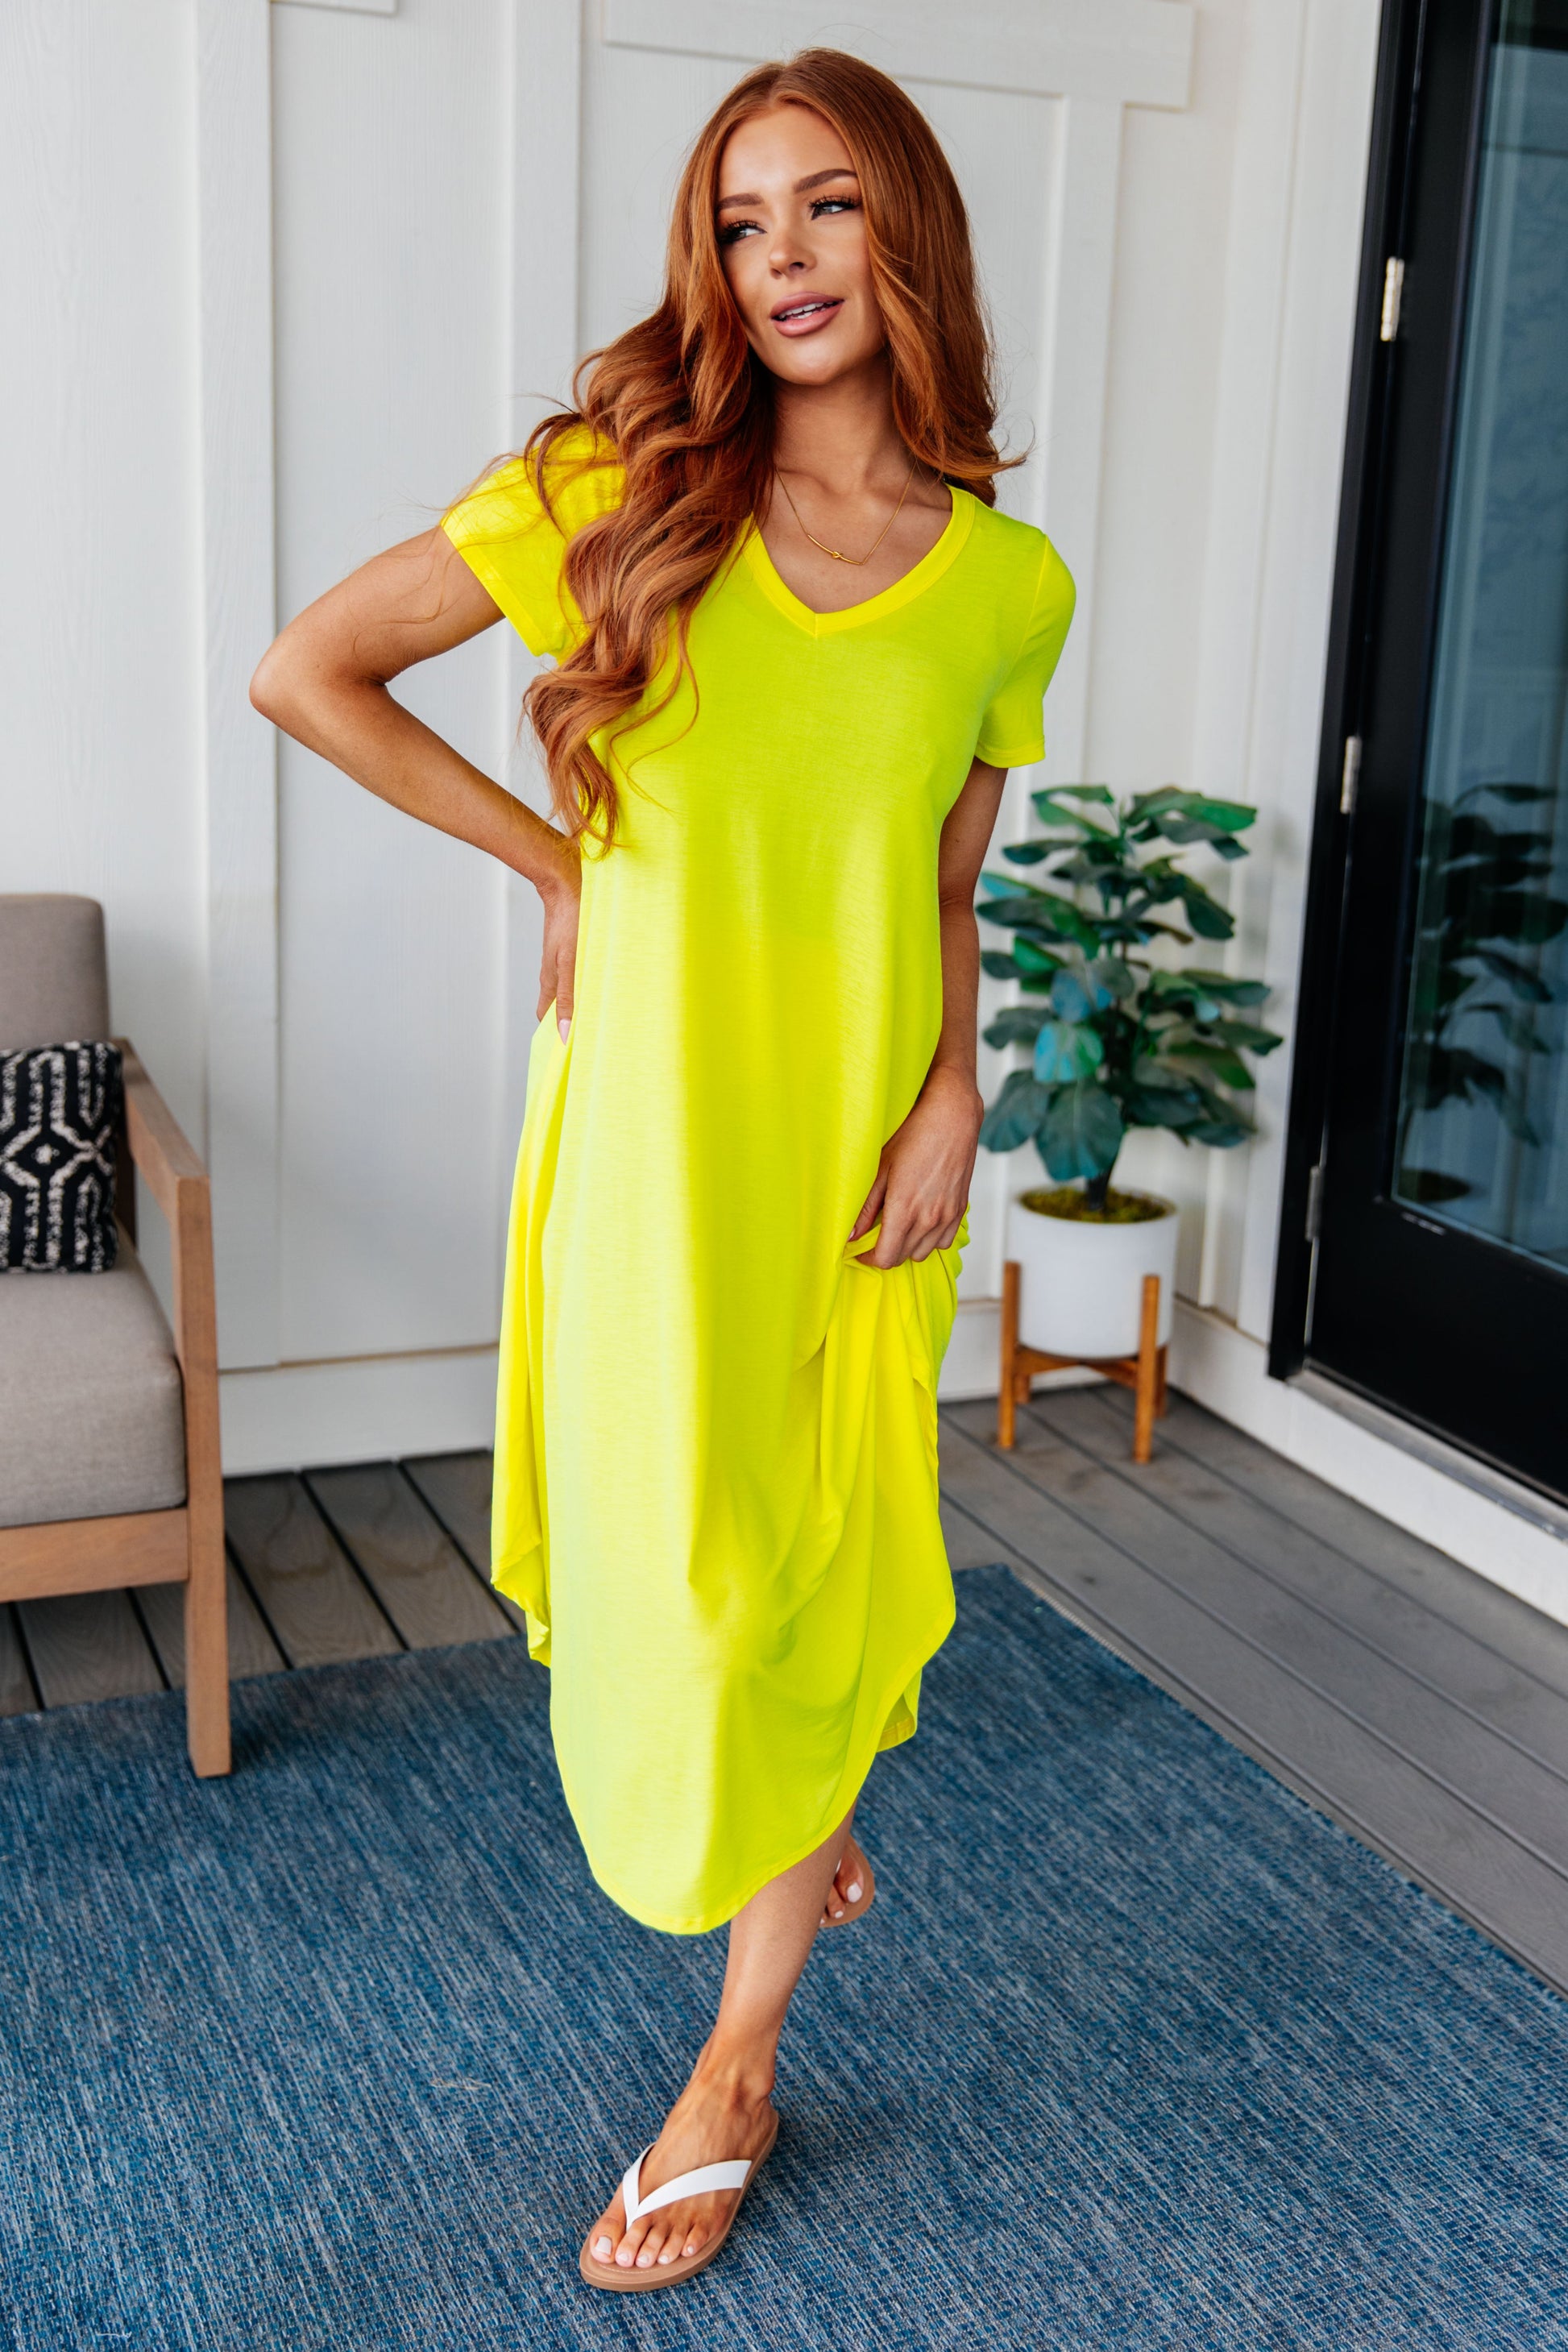 Dolman Sleeve Maxi Dress in Neon Yellow-Dresses-Ave Shops-Happy Campers Boutique, Women's Fashion and More in Plainwell, MI